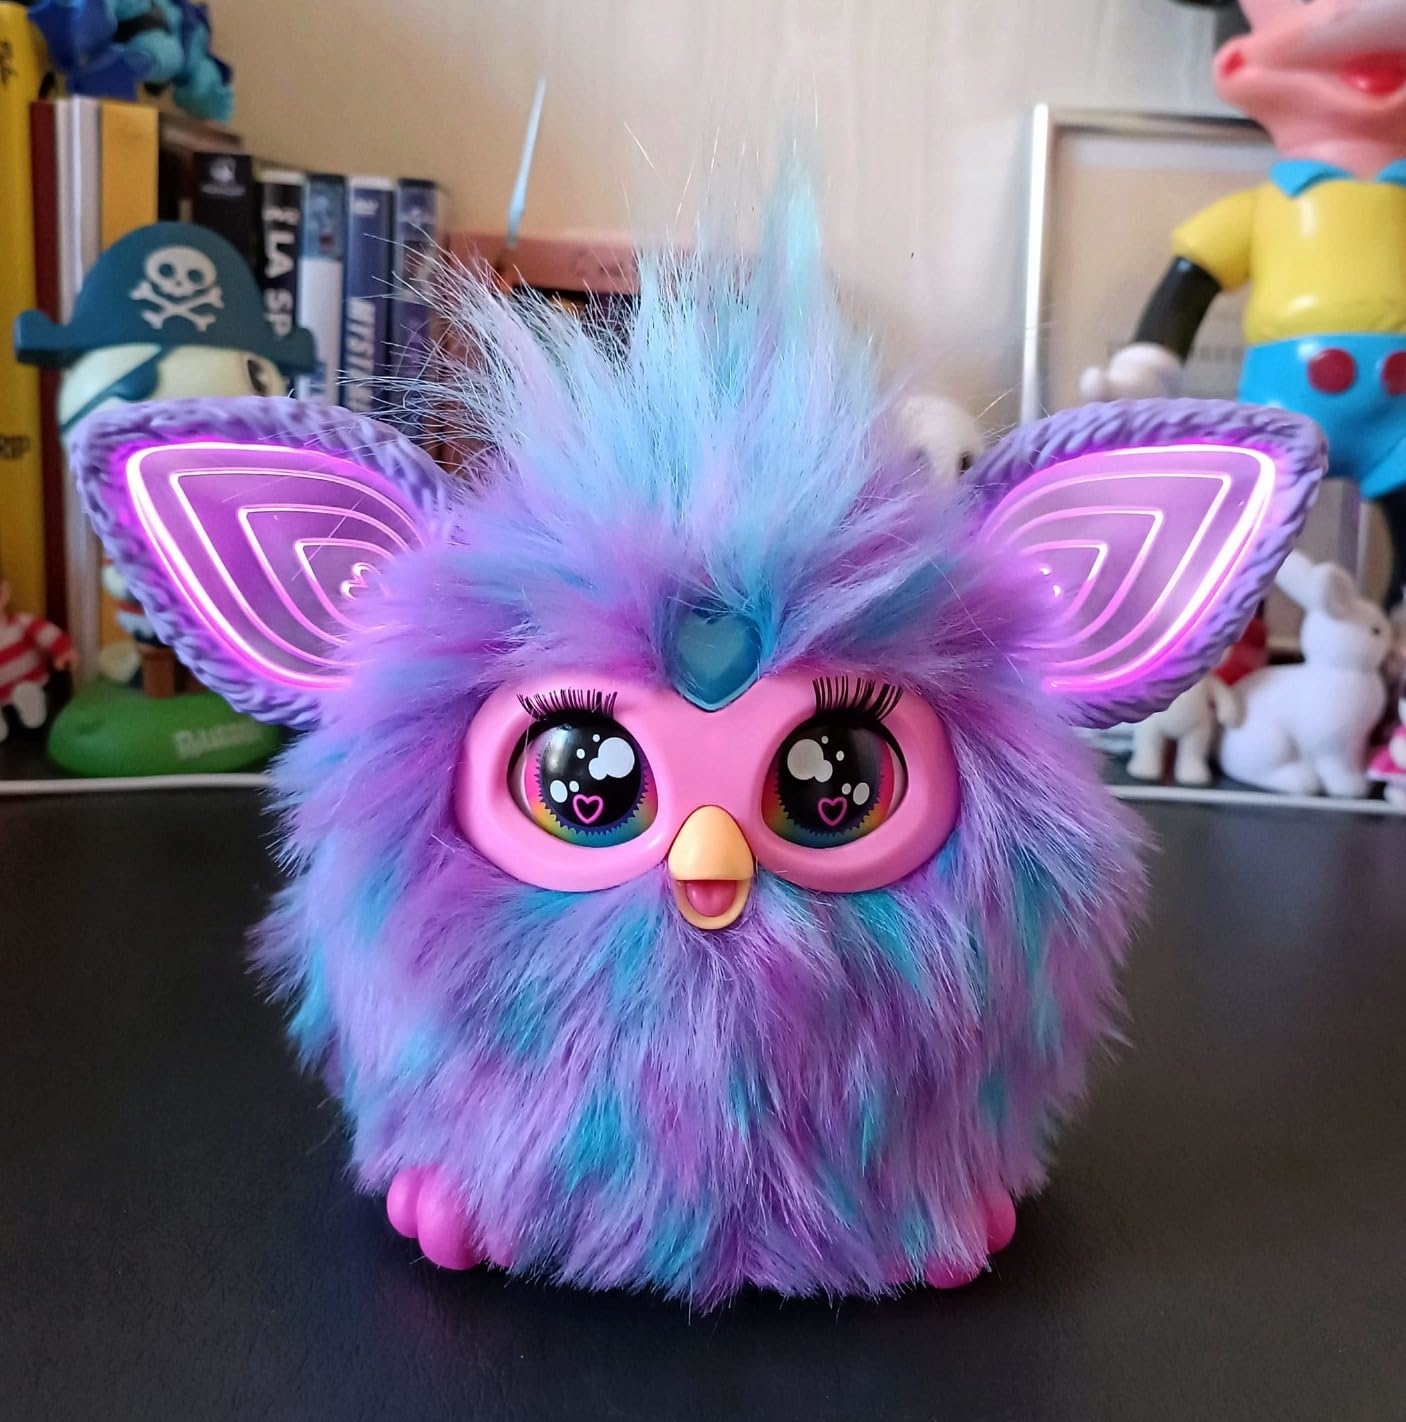 a reviewer photo of the Furby